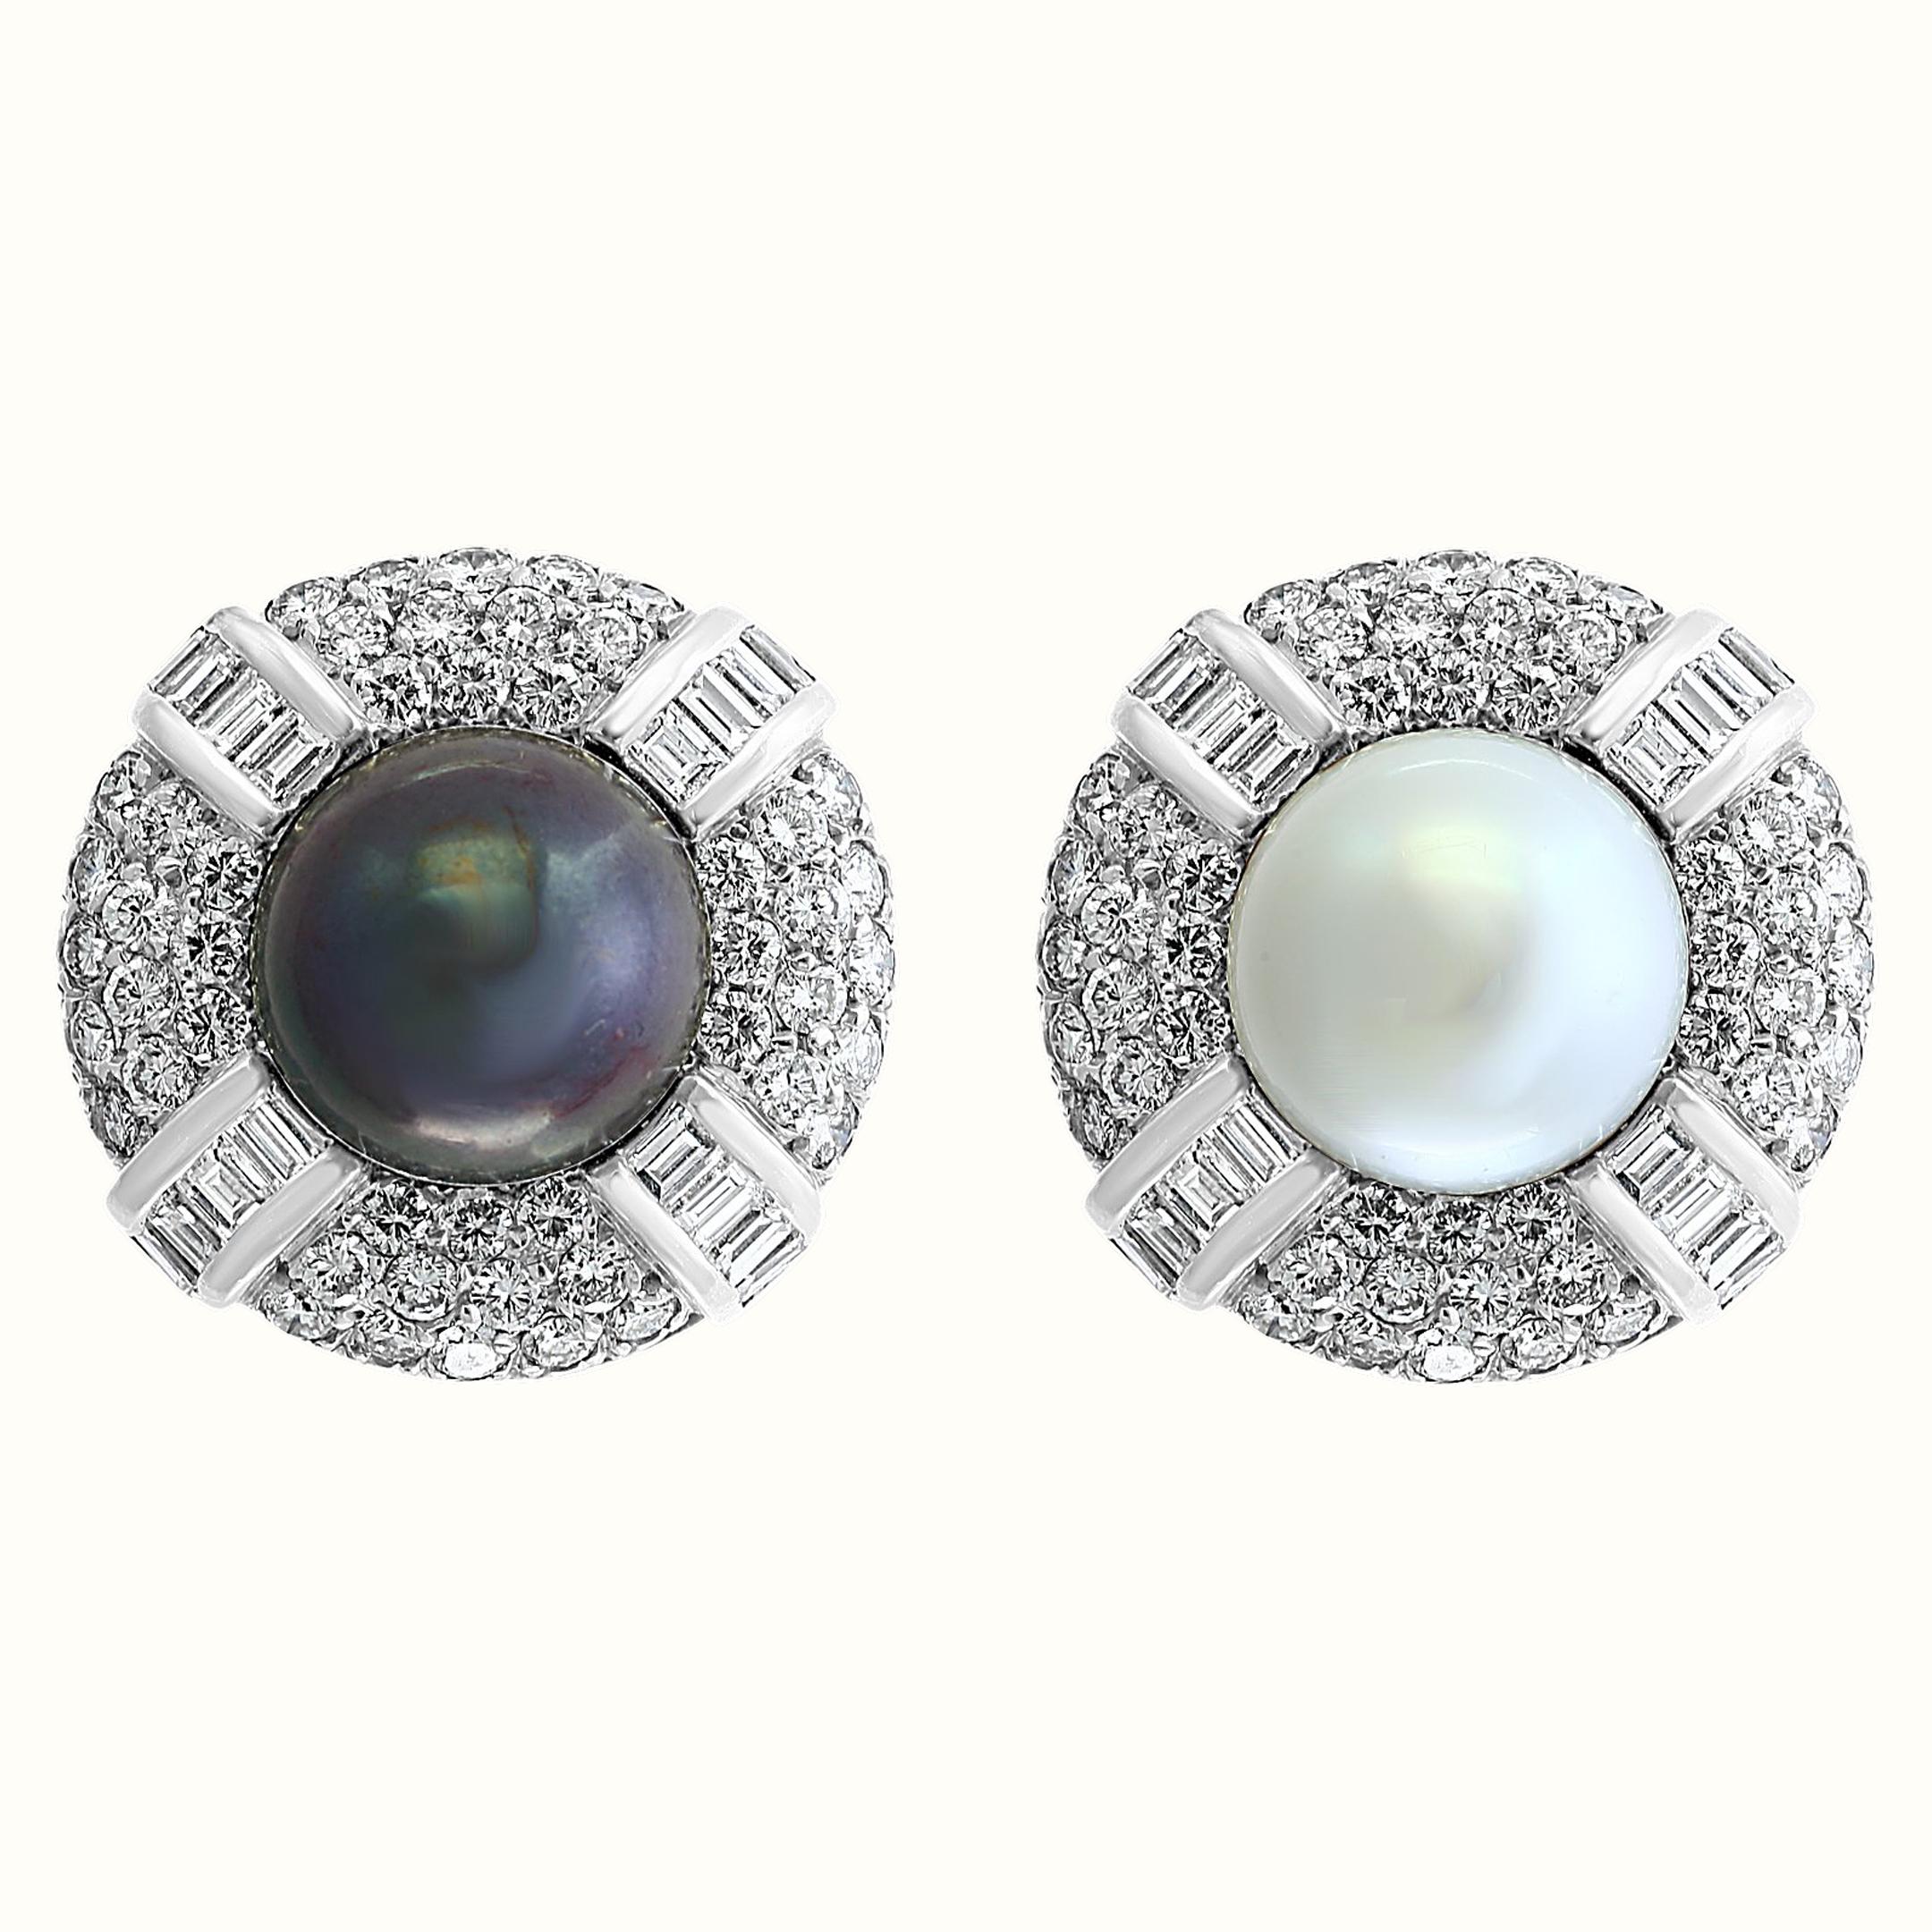 South Sea Pearl Day & Night with 12 Carats Diamond Cocktail Earrings 18 K White Gold , 
Beautiful estate piece
 one South Sea white Pearl and one Tahitian black Pearl
both pearls are absolutely clean with no blemishes .
Pearls are surrounded by 12